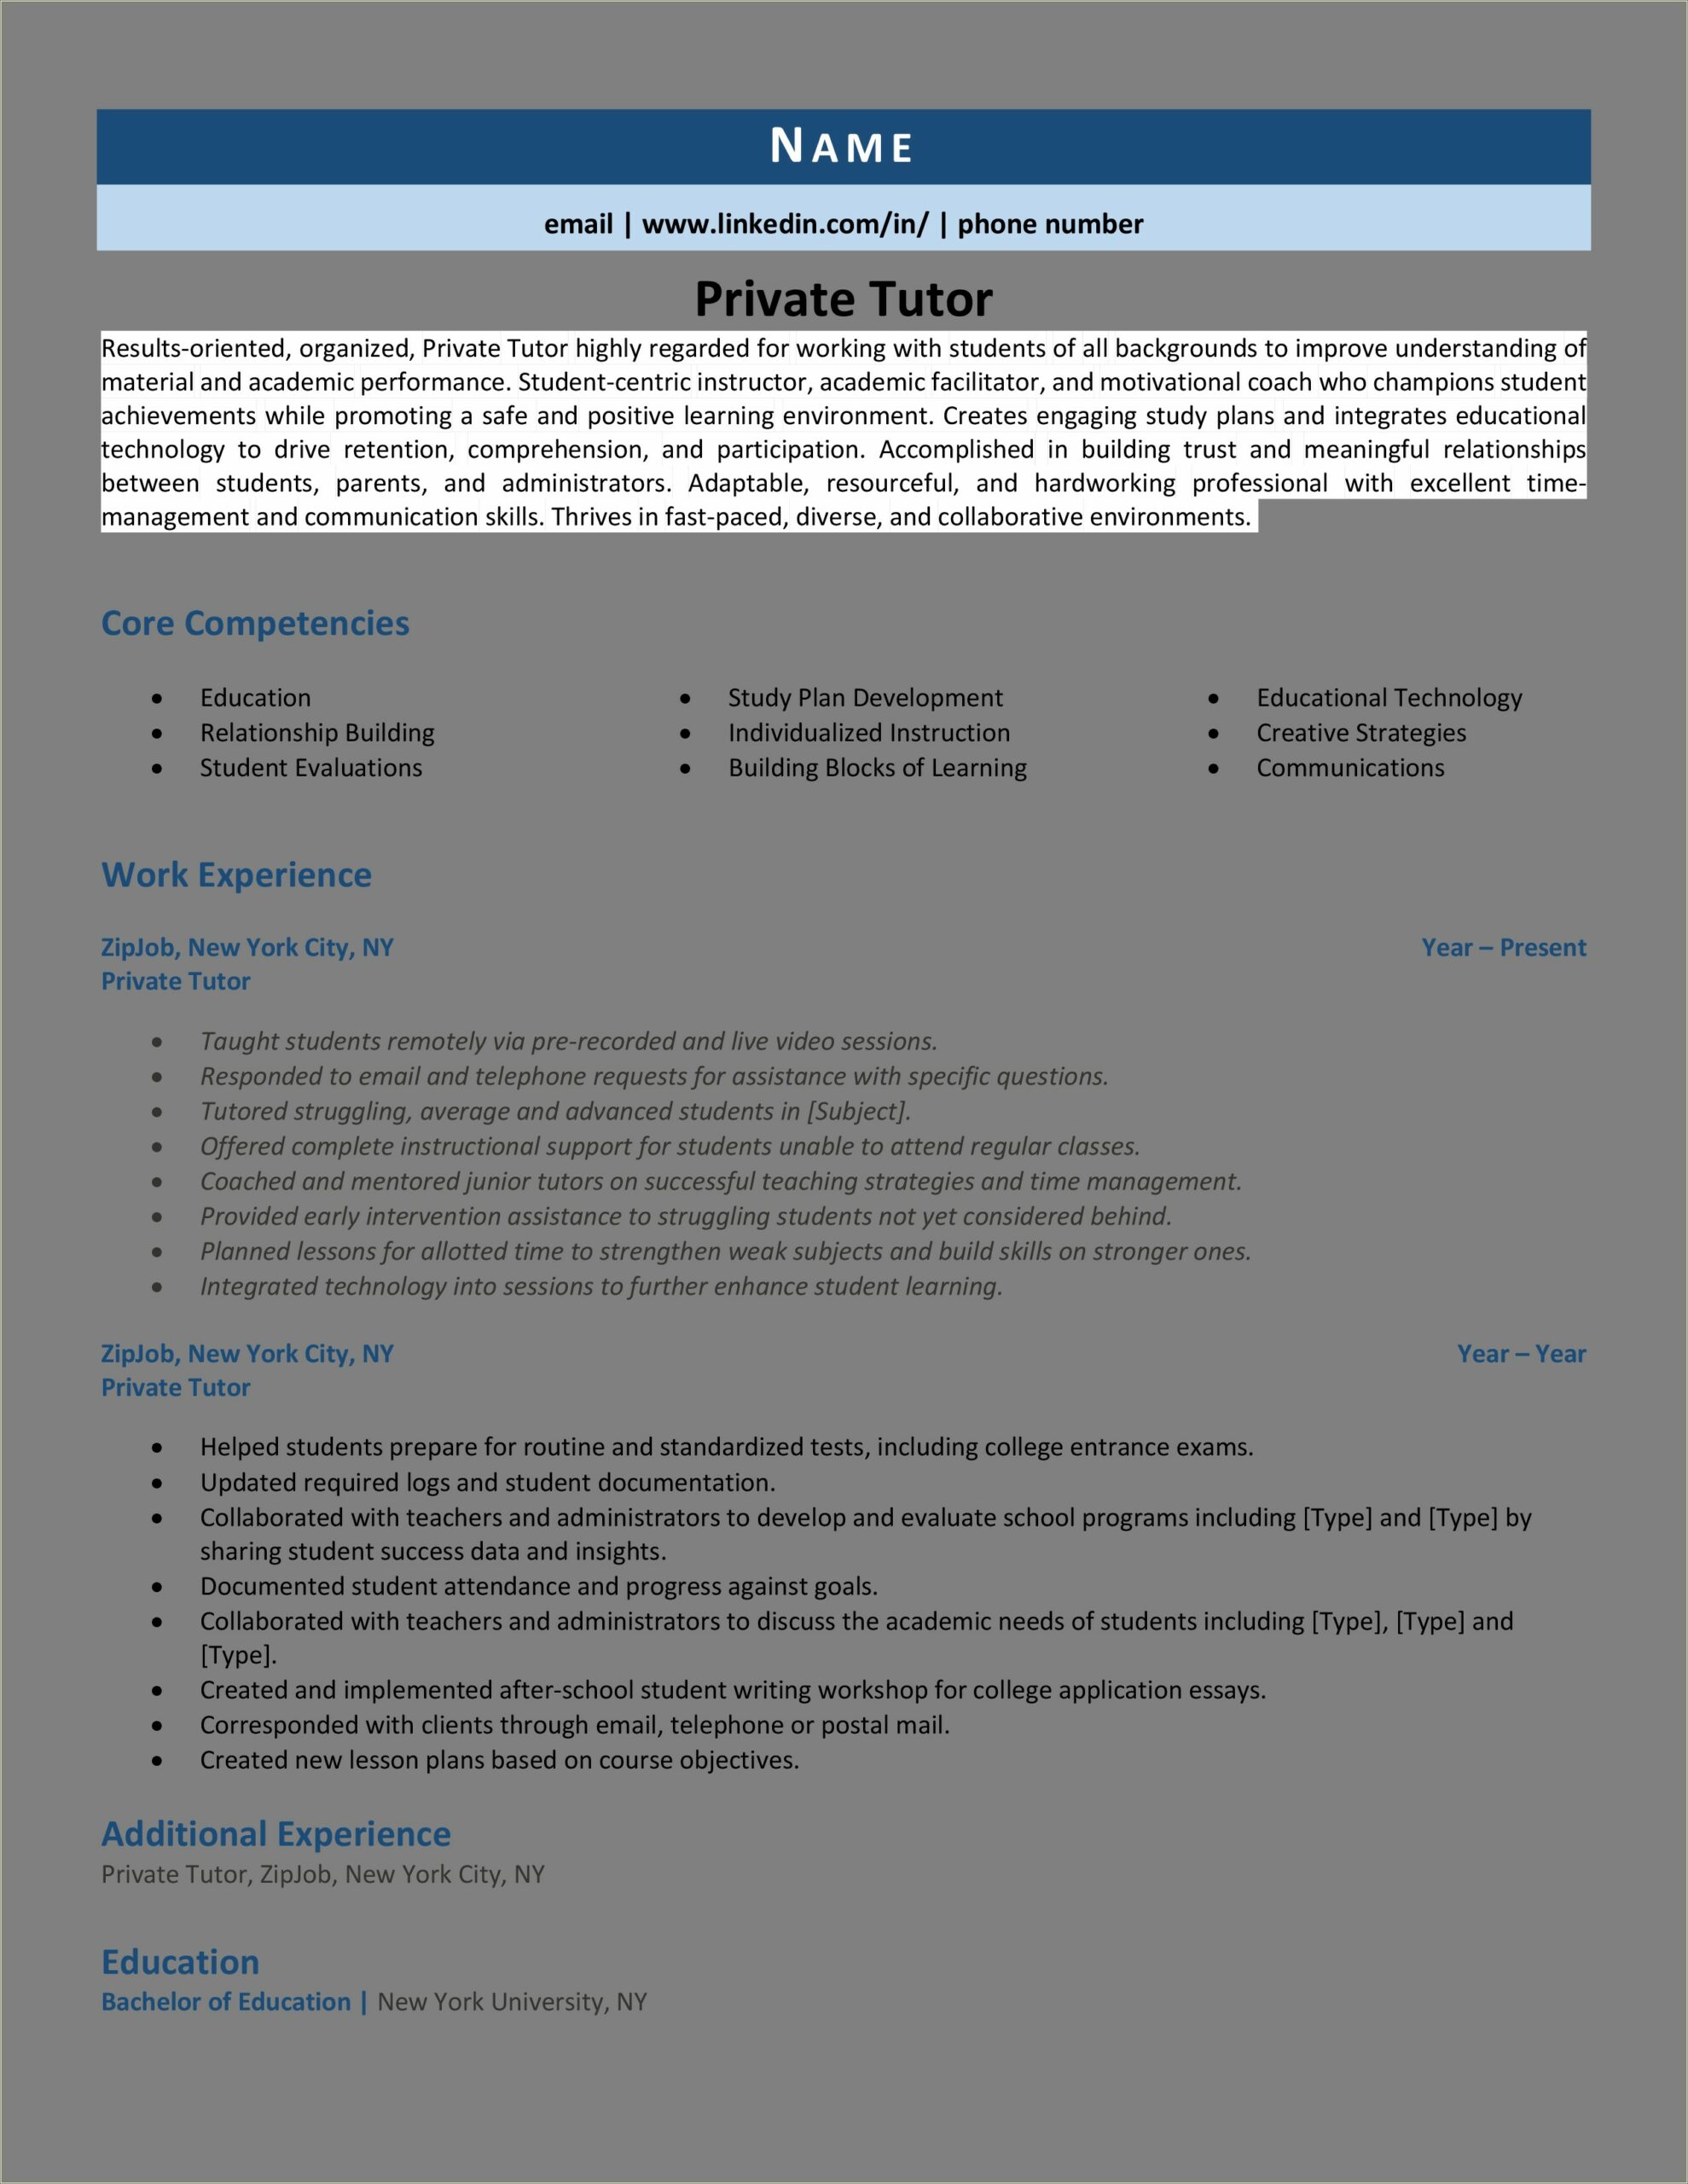 Descriptions For Being A Tutor On Resume